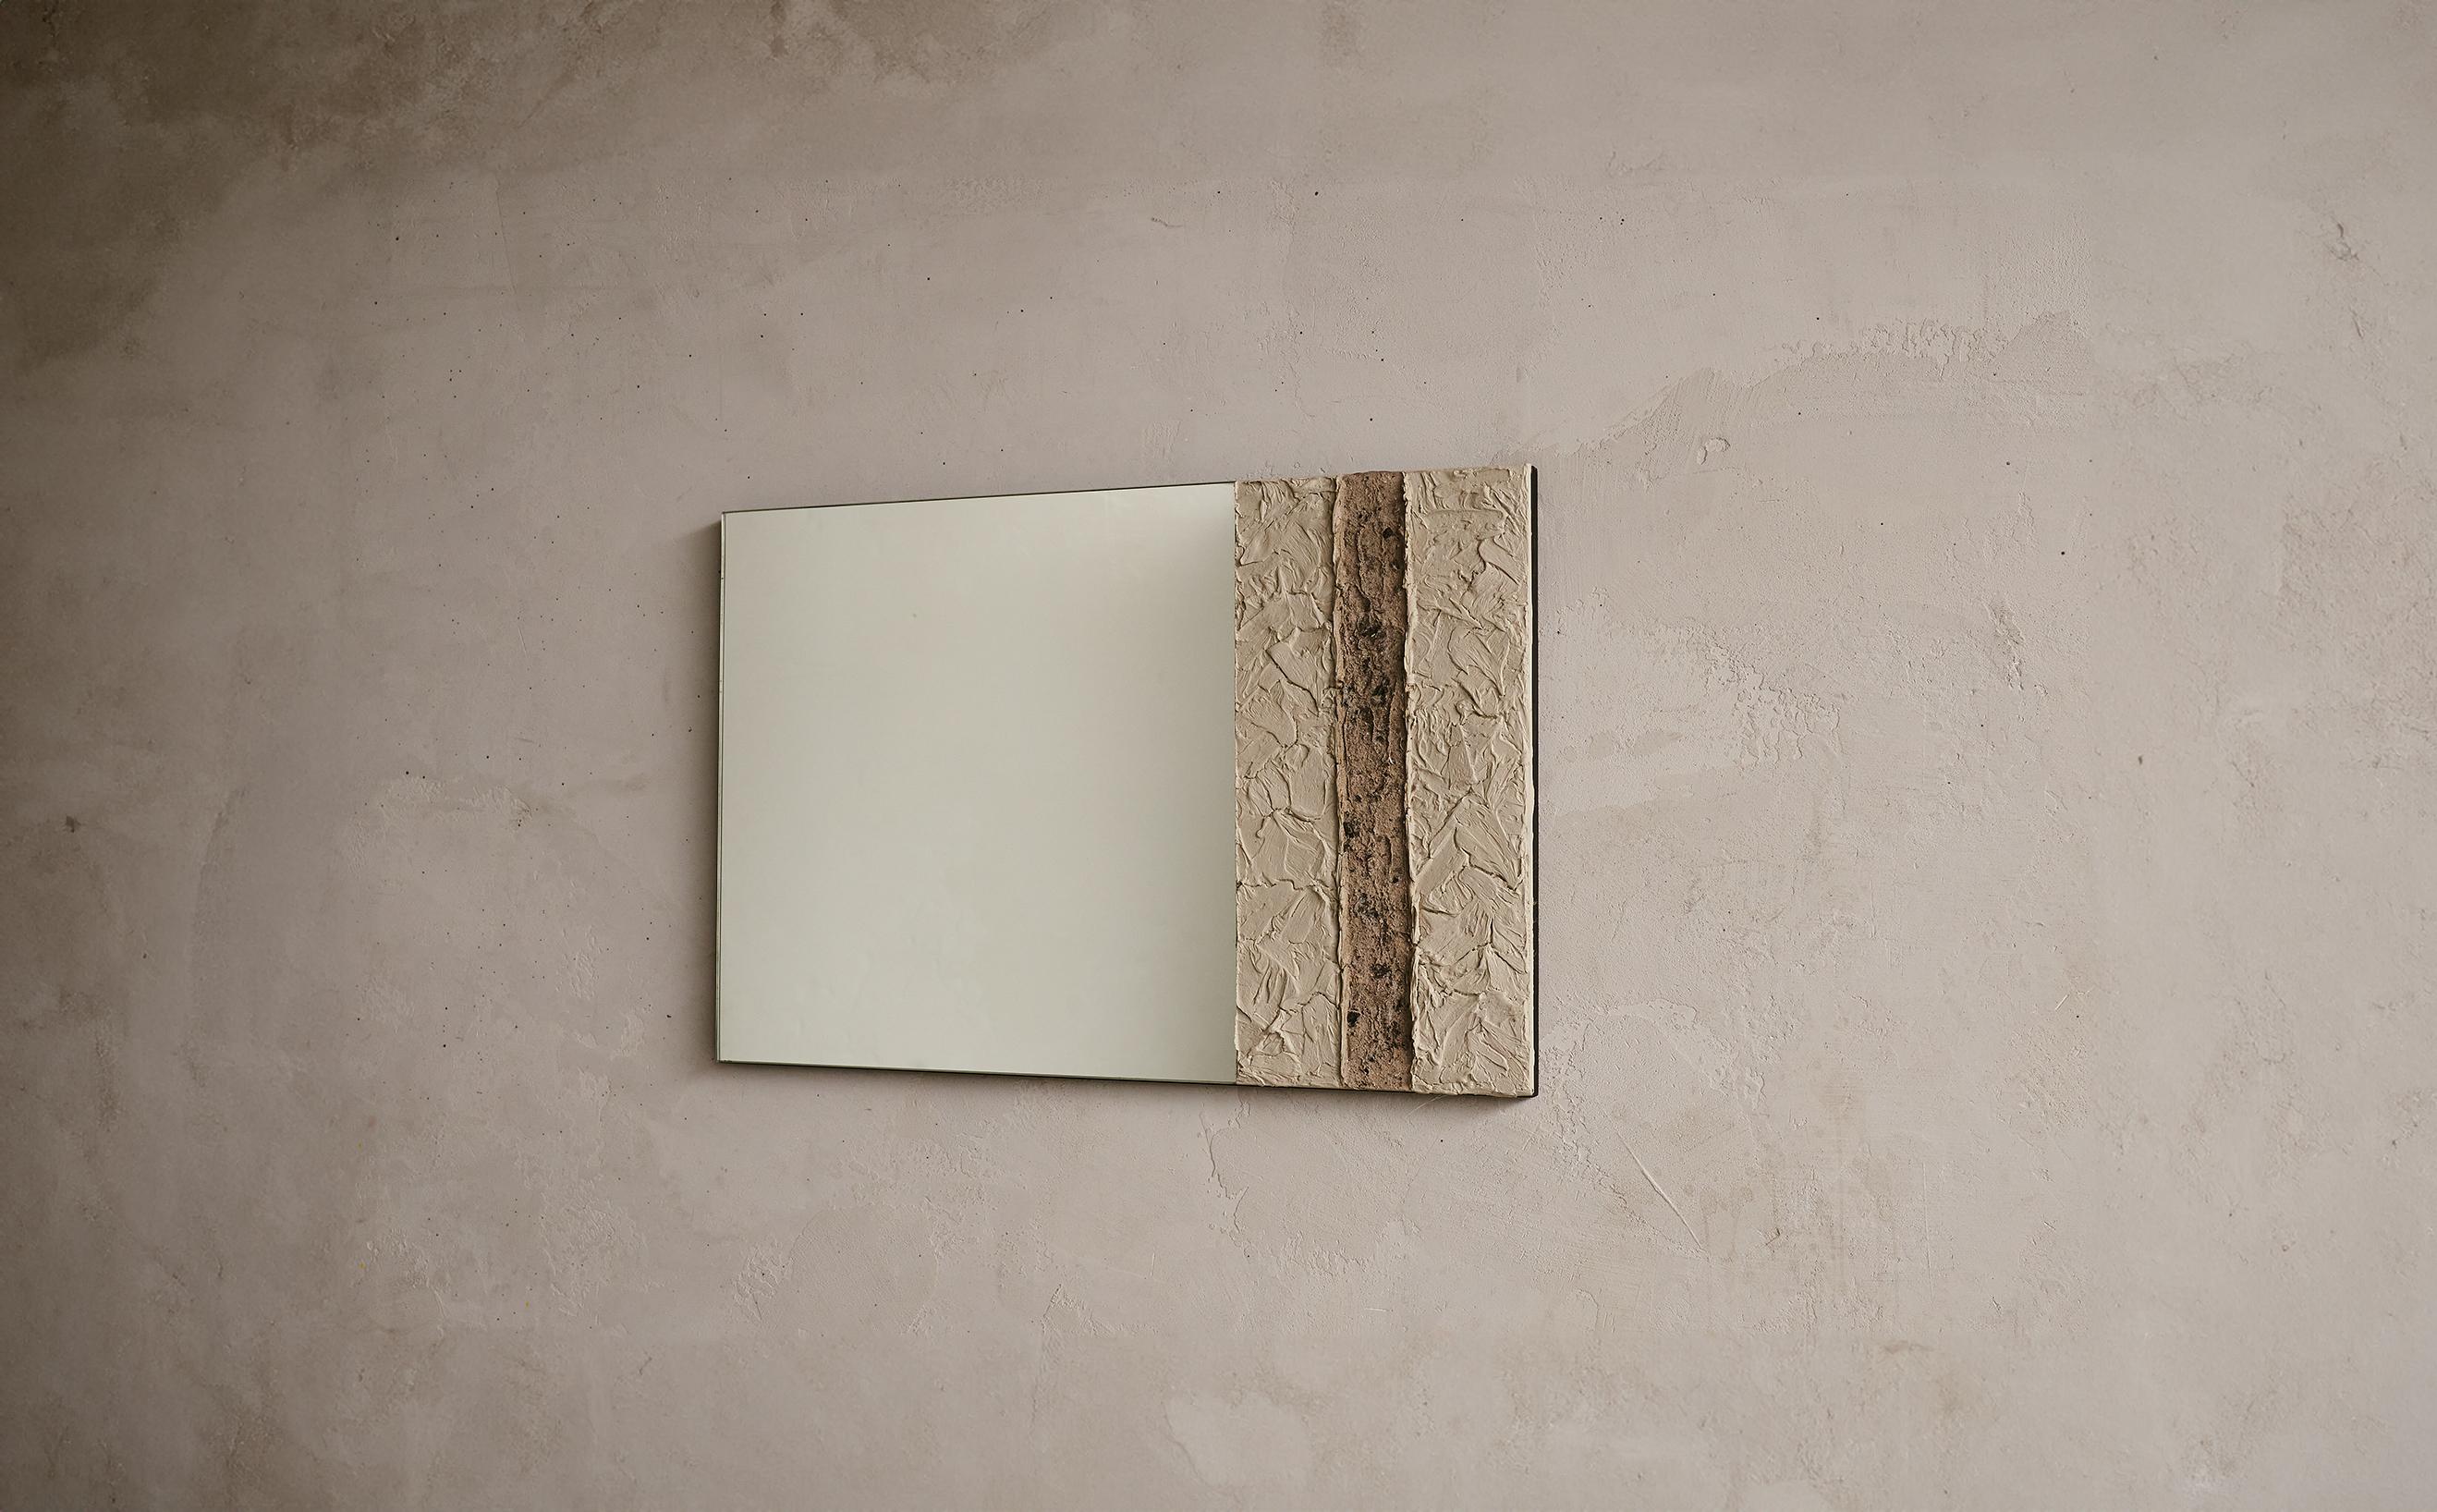 The Pompeii II Mirror consists of hand sculpted plaster and burnt ash that is hand-spread and worked.

*Burnt Ash shape and color is organic and may differ from piece to piece to keep uniqueness in the artists own hand and technique.